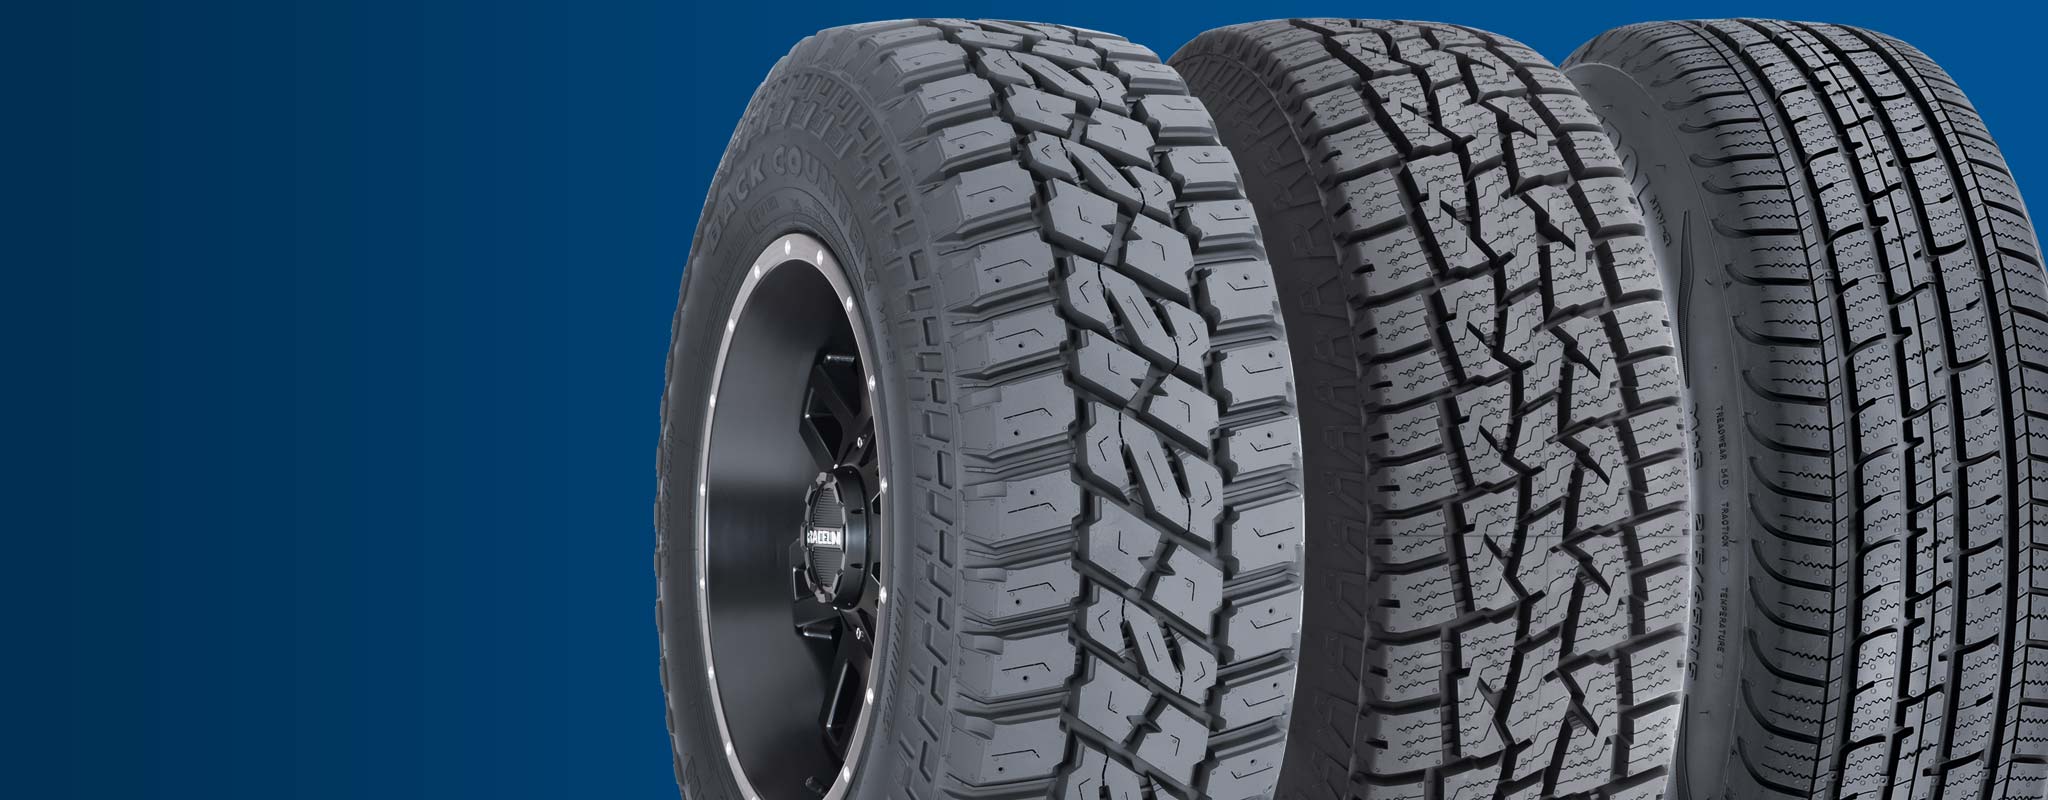 Tires Wheels For Sale Buy New Tires Online In Person Les Schwab